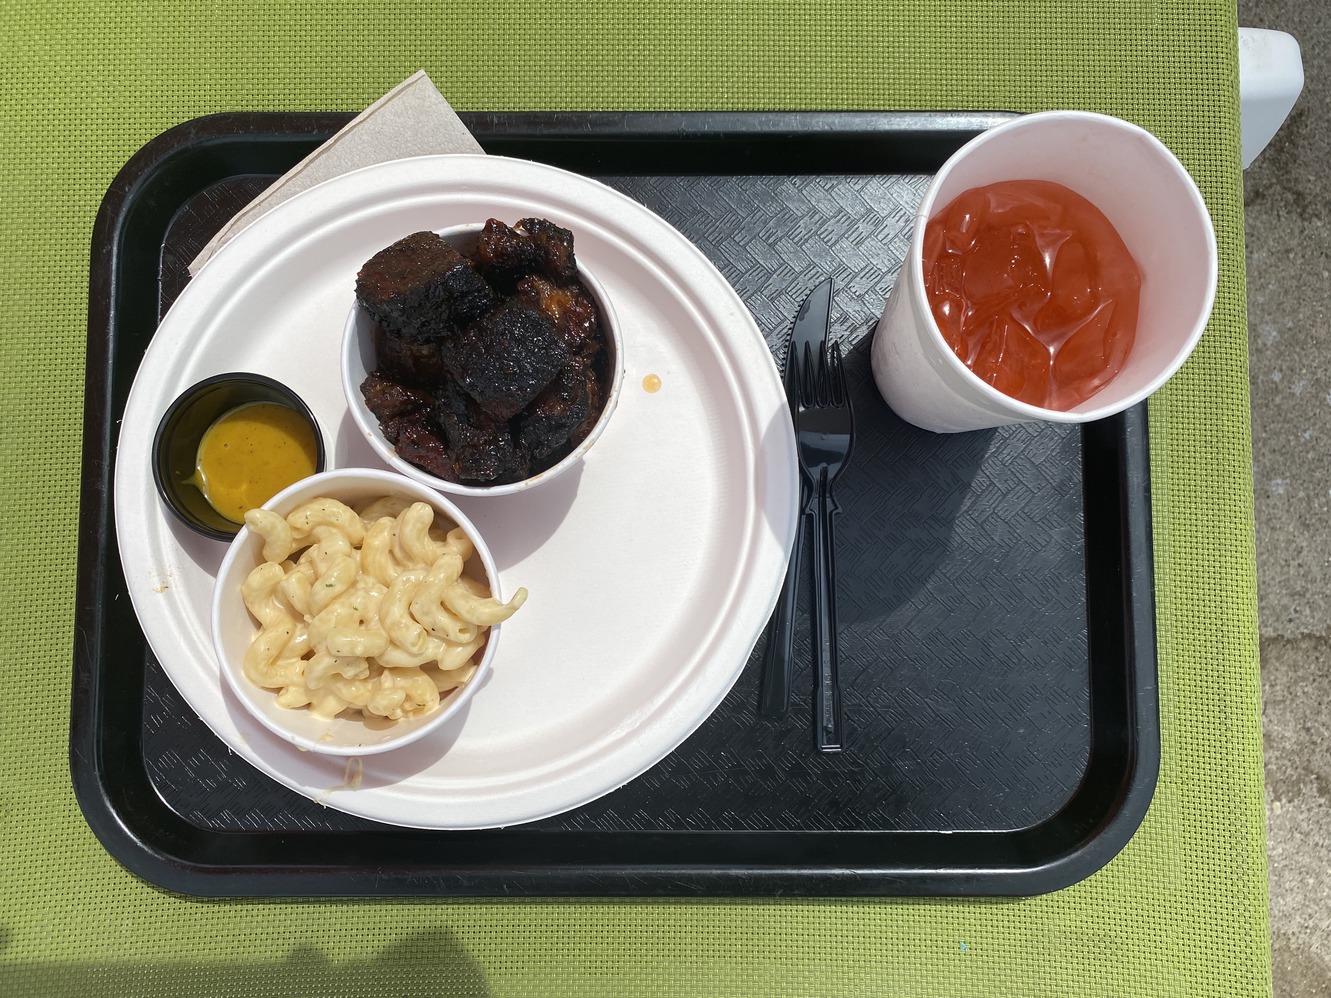 This is the Burnt Ends beef barbecue meal.